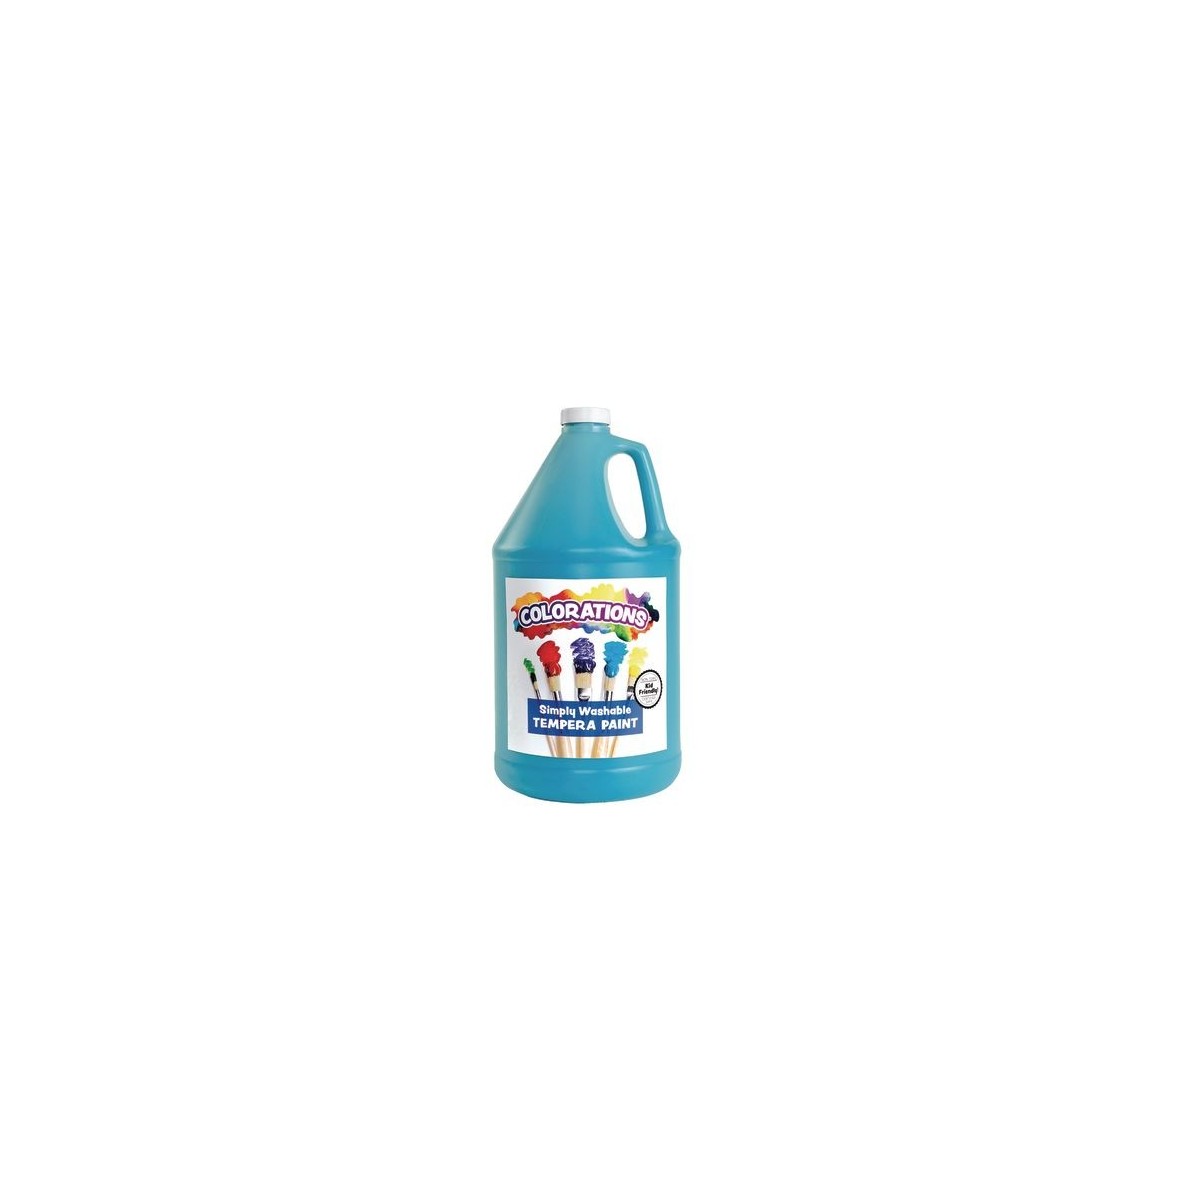 Handy Art Little Masters Washable Tempera Paint - 4 Gallon Kit, White, Yellow, Red, Blue